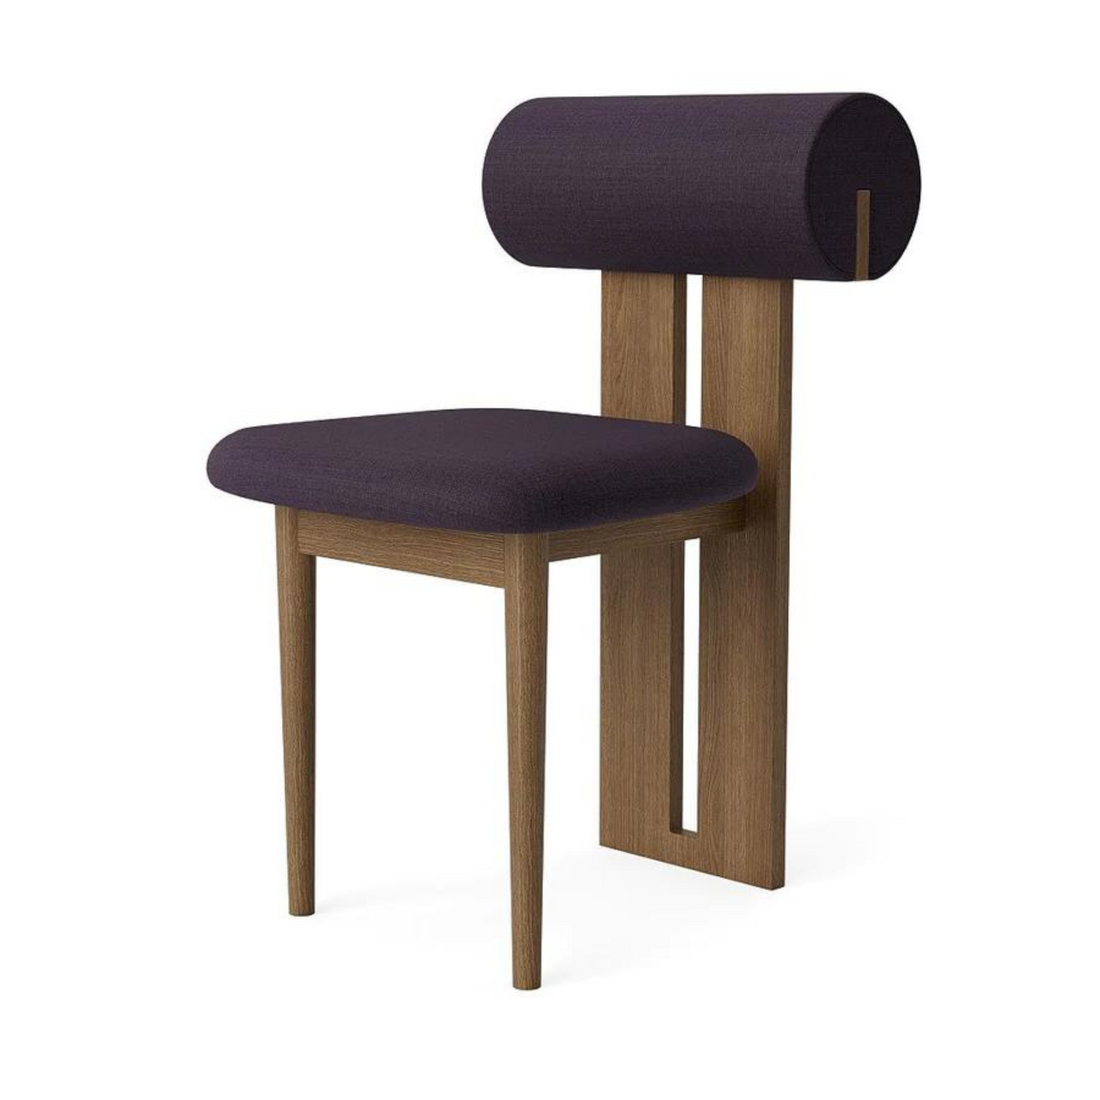 Hippo Dinning Chair In Light Smoked Oak And Canva 2 694 Finish by NOR11